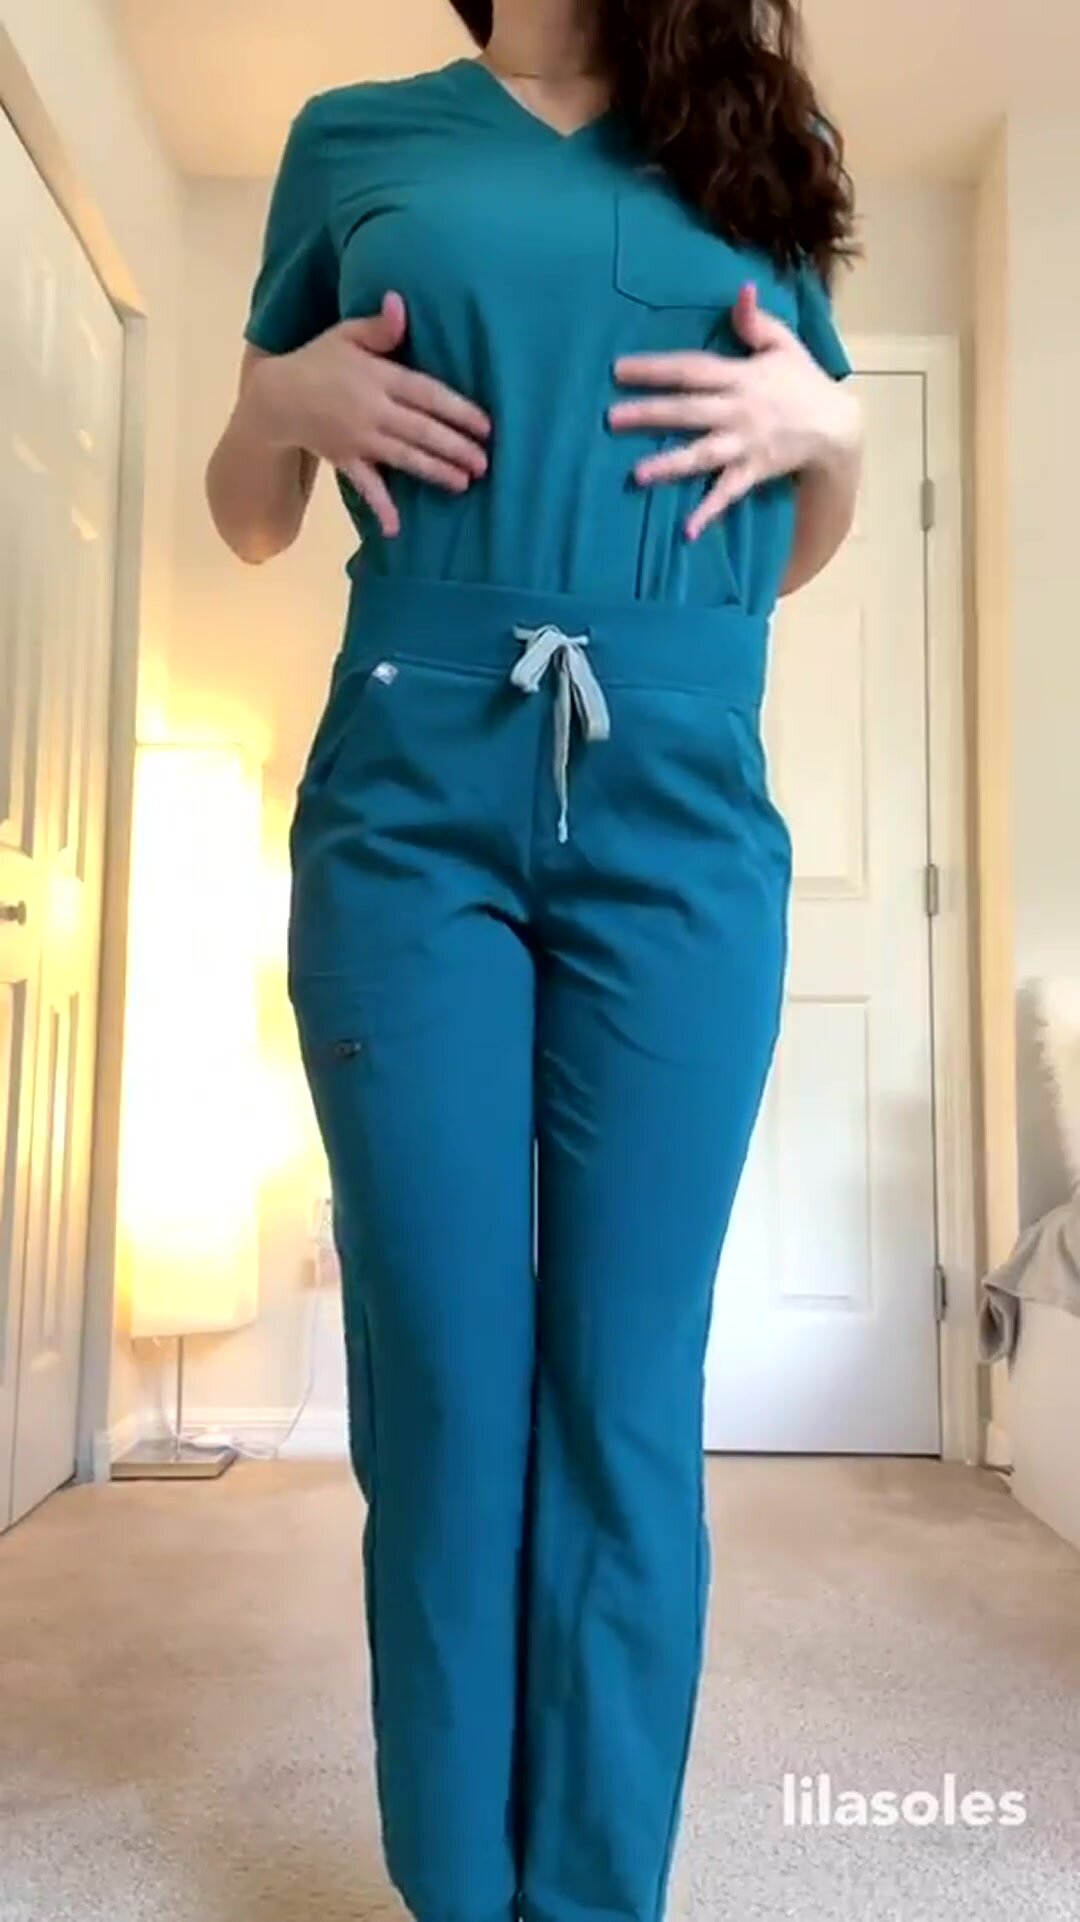 I love reminding people that doctors can be sexy too